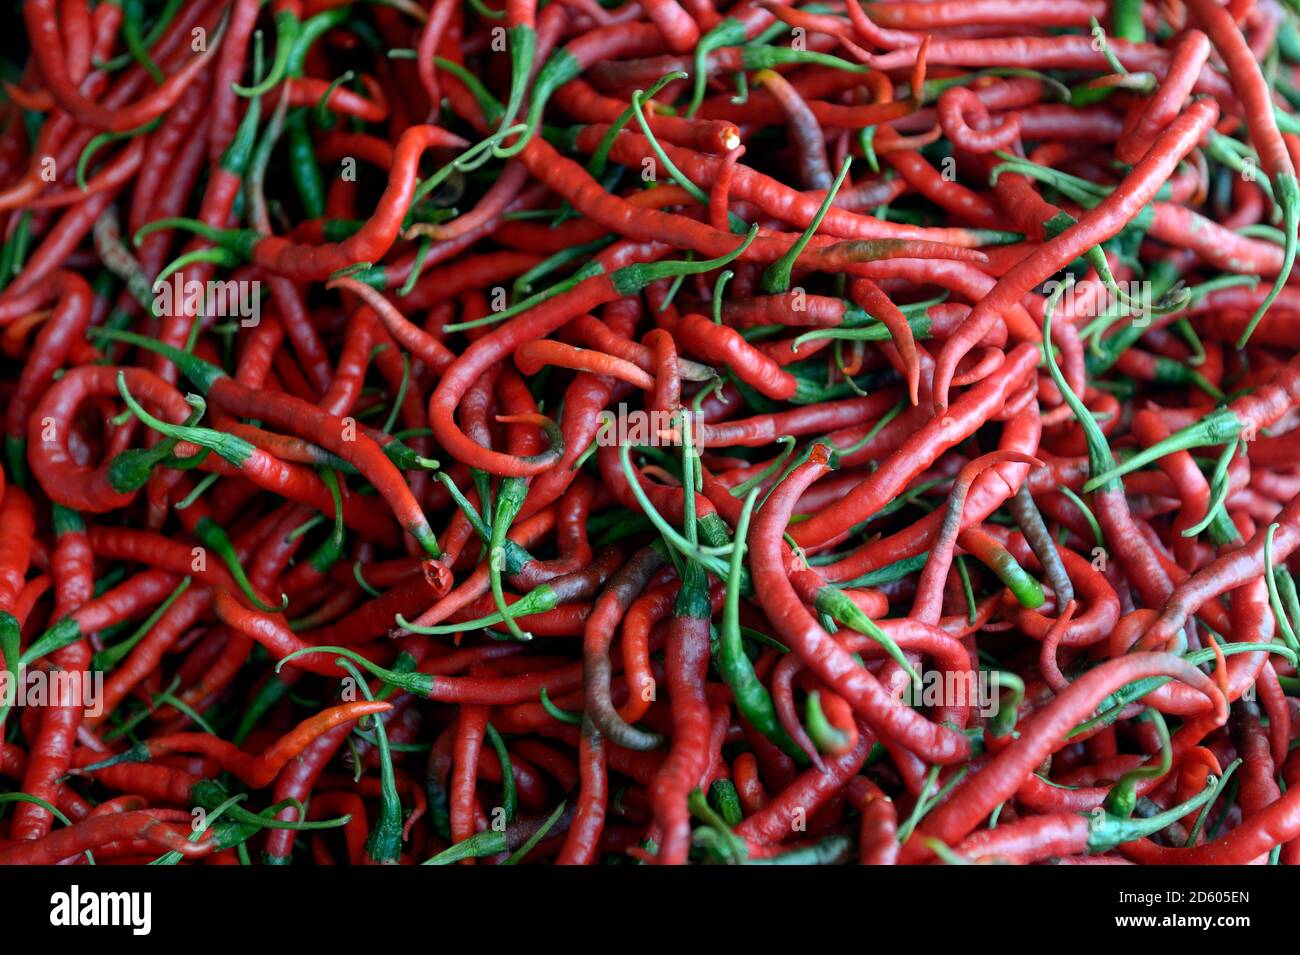 Indonesia, Simeulue, red chili pods at market Stock Photo